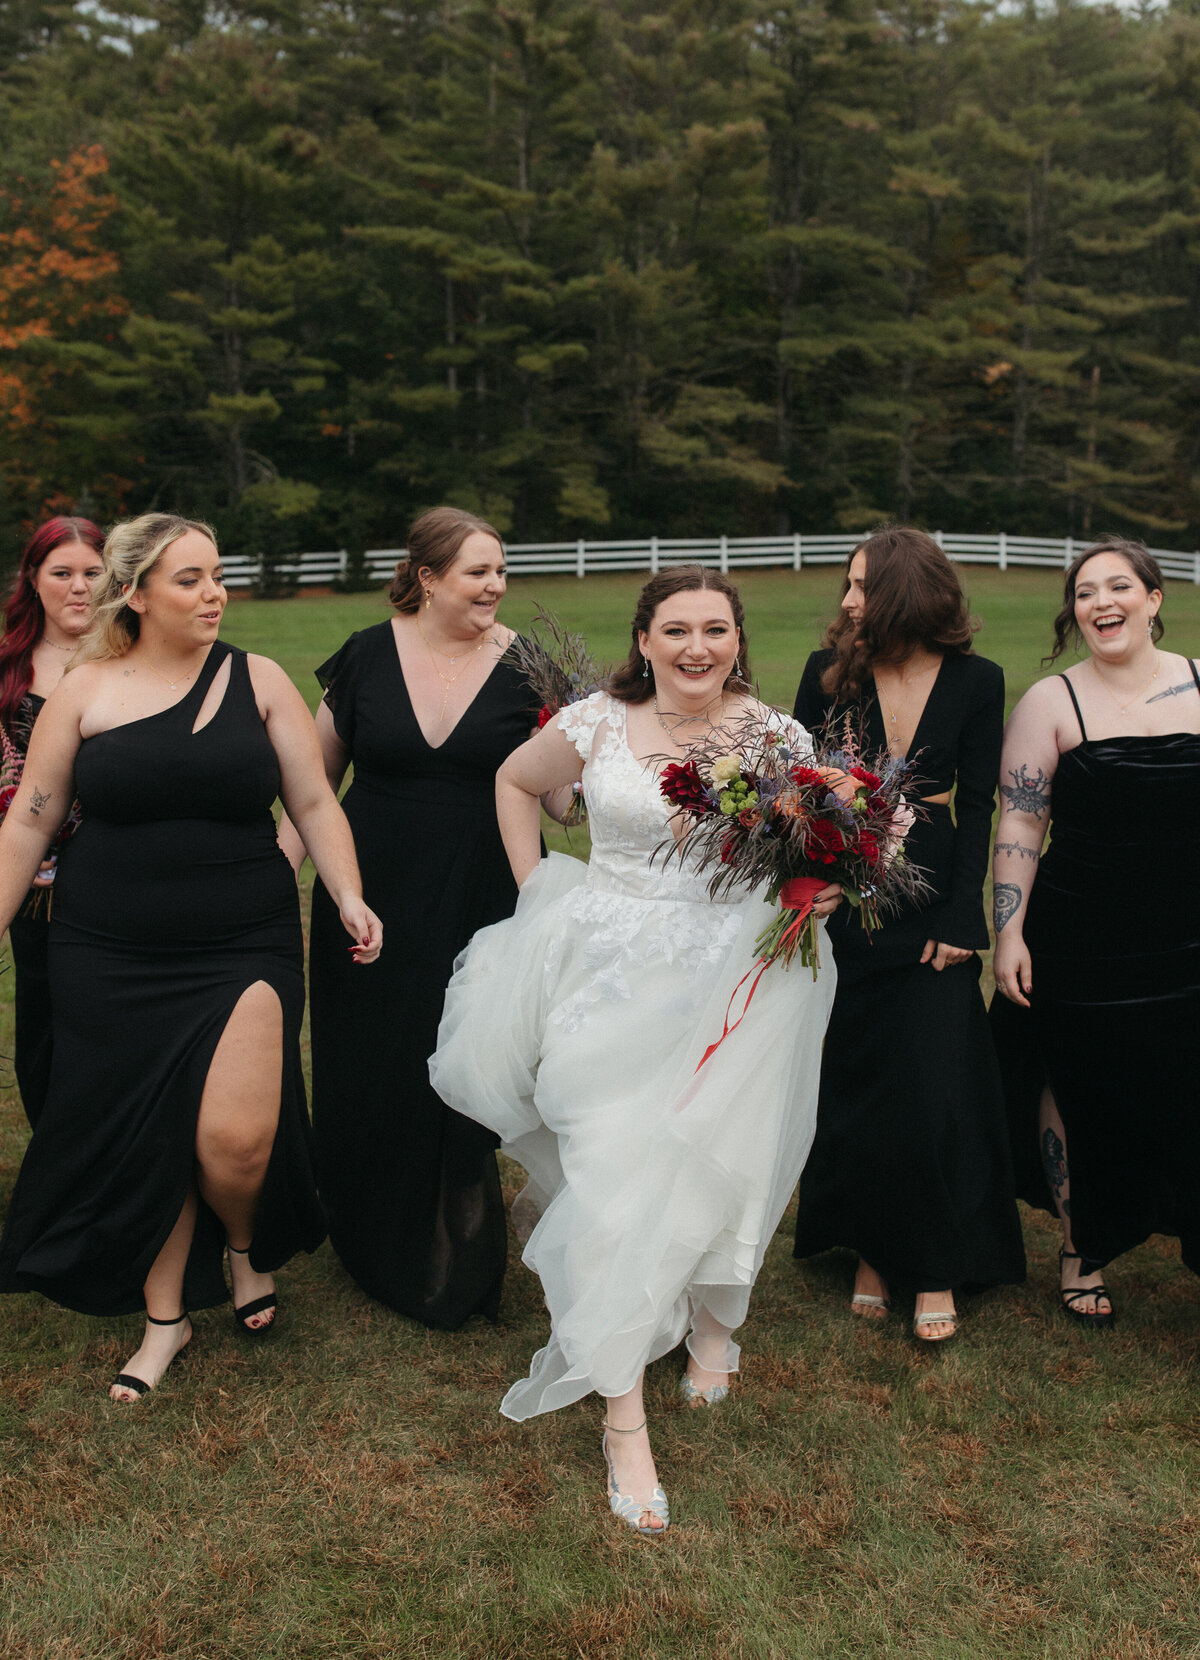 Maine wedding with black dresses and colorful florals